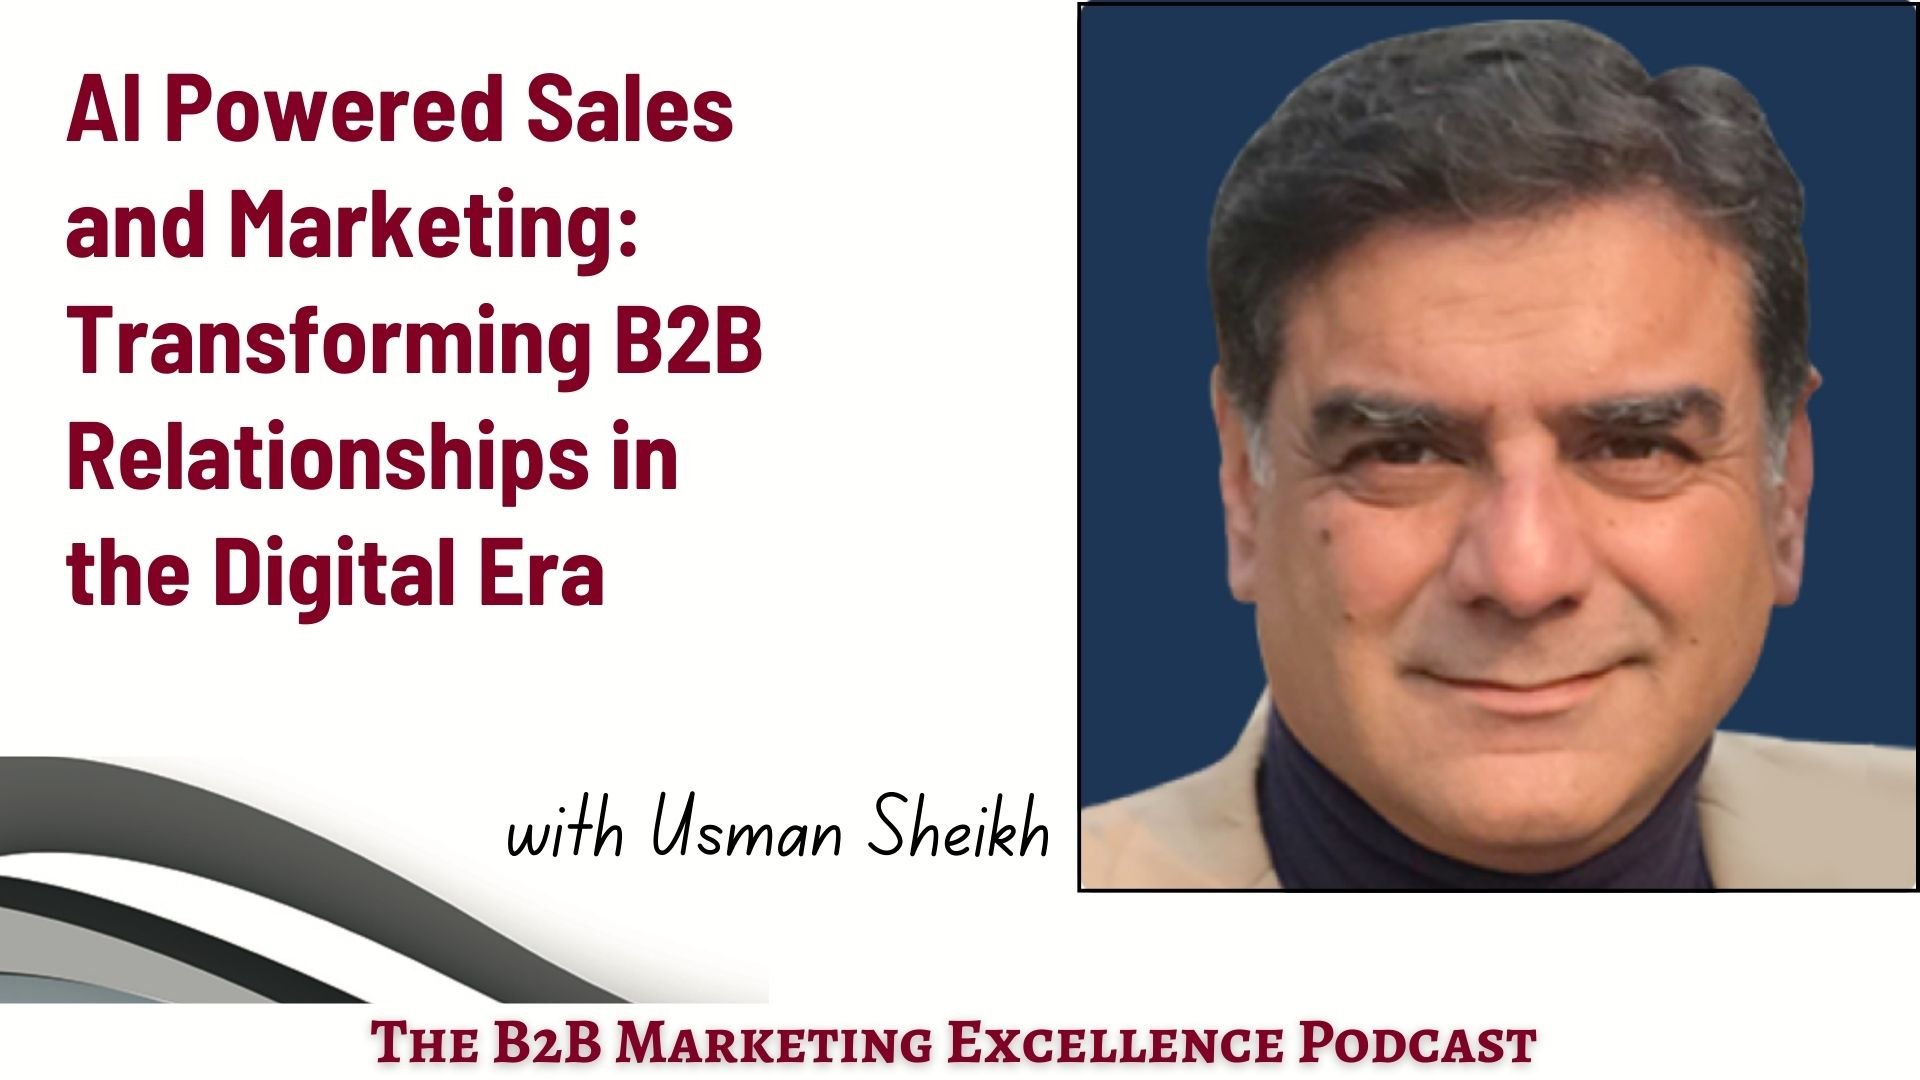 AI Powered Sales and Marketing: Transforming B2B Relationships in the Digital Era